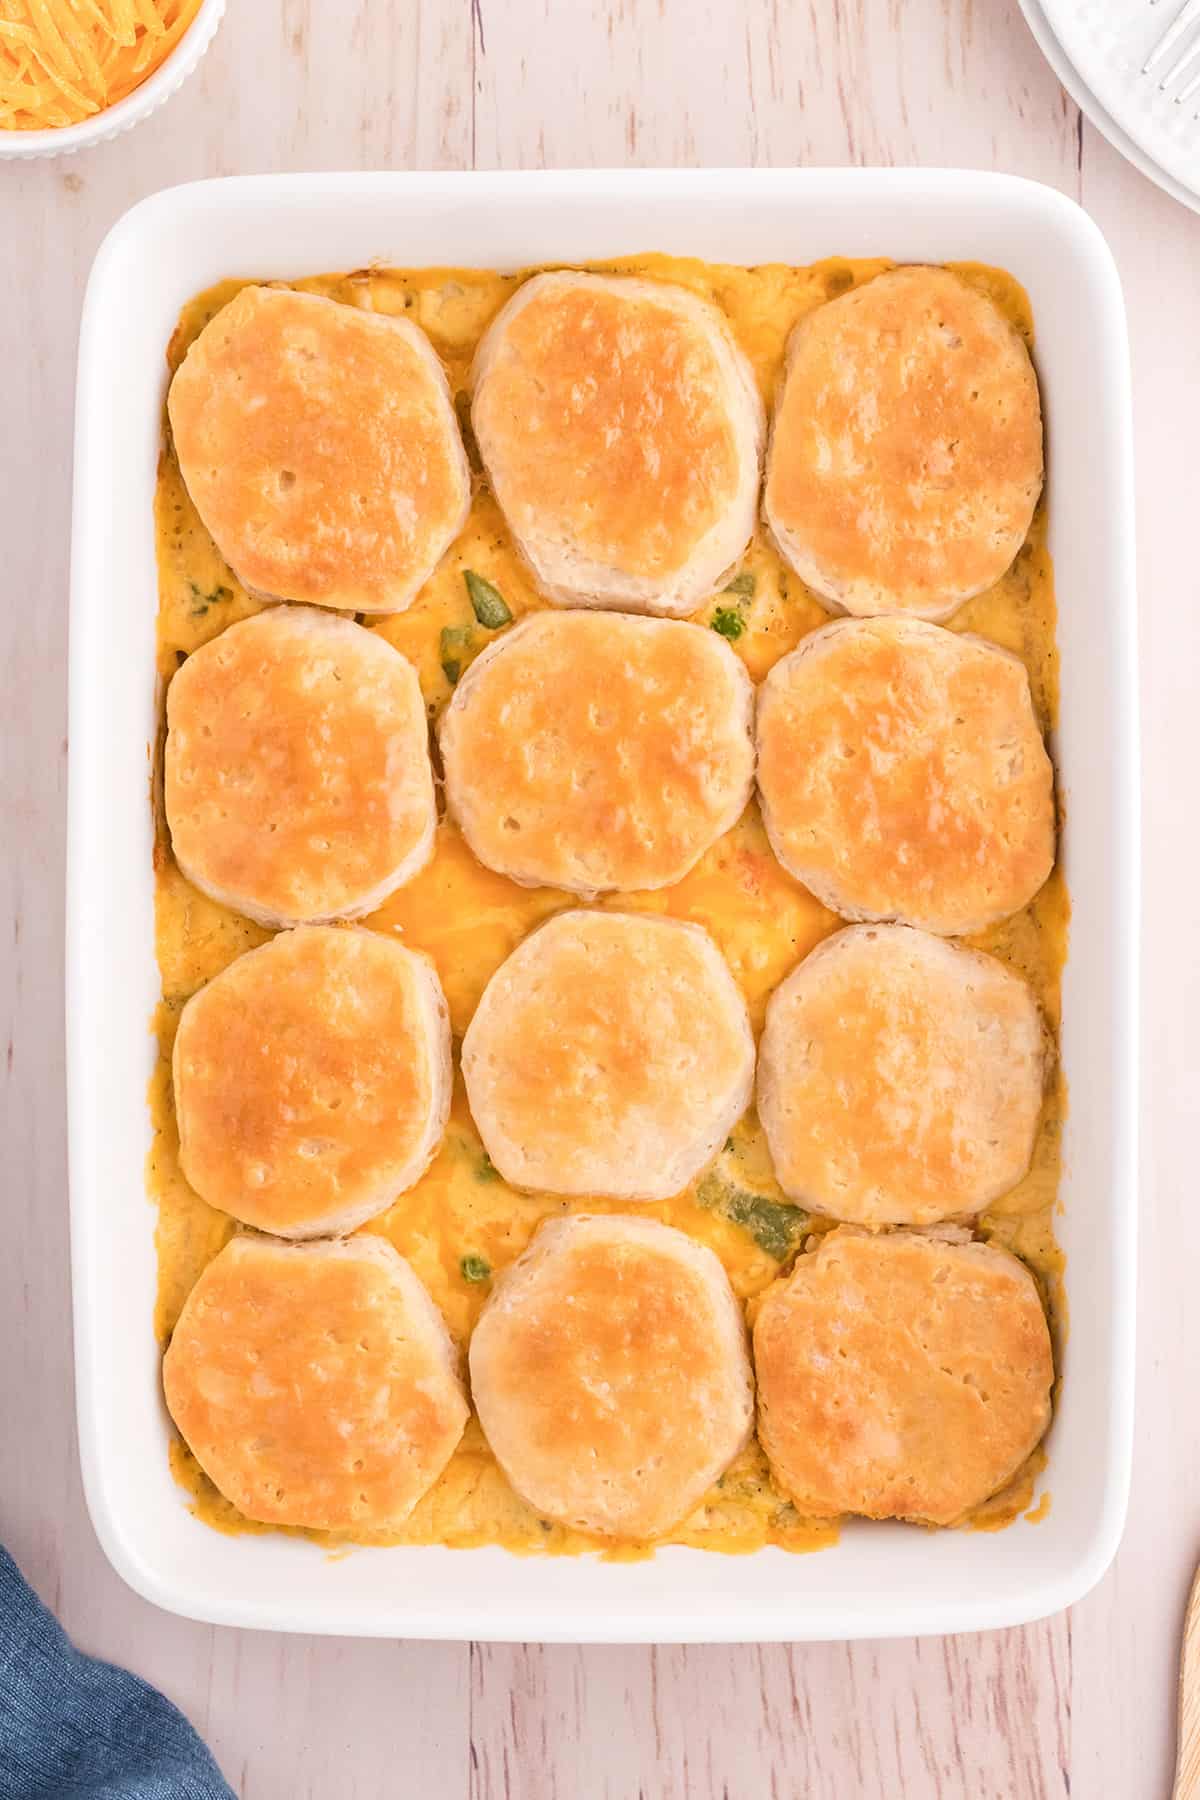 Finished casserole with biscuits on top.